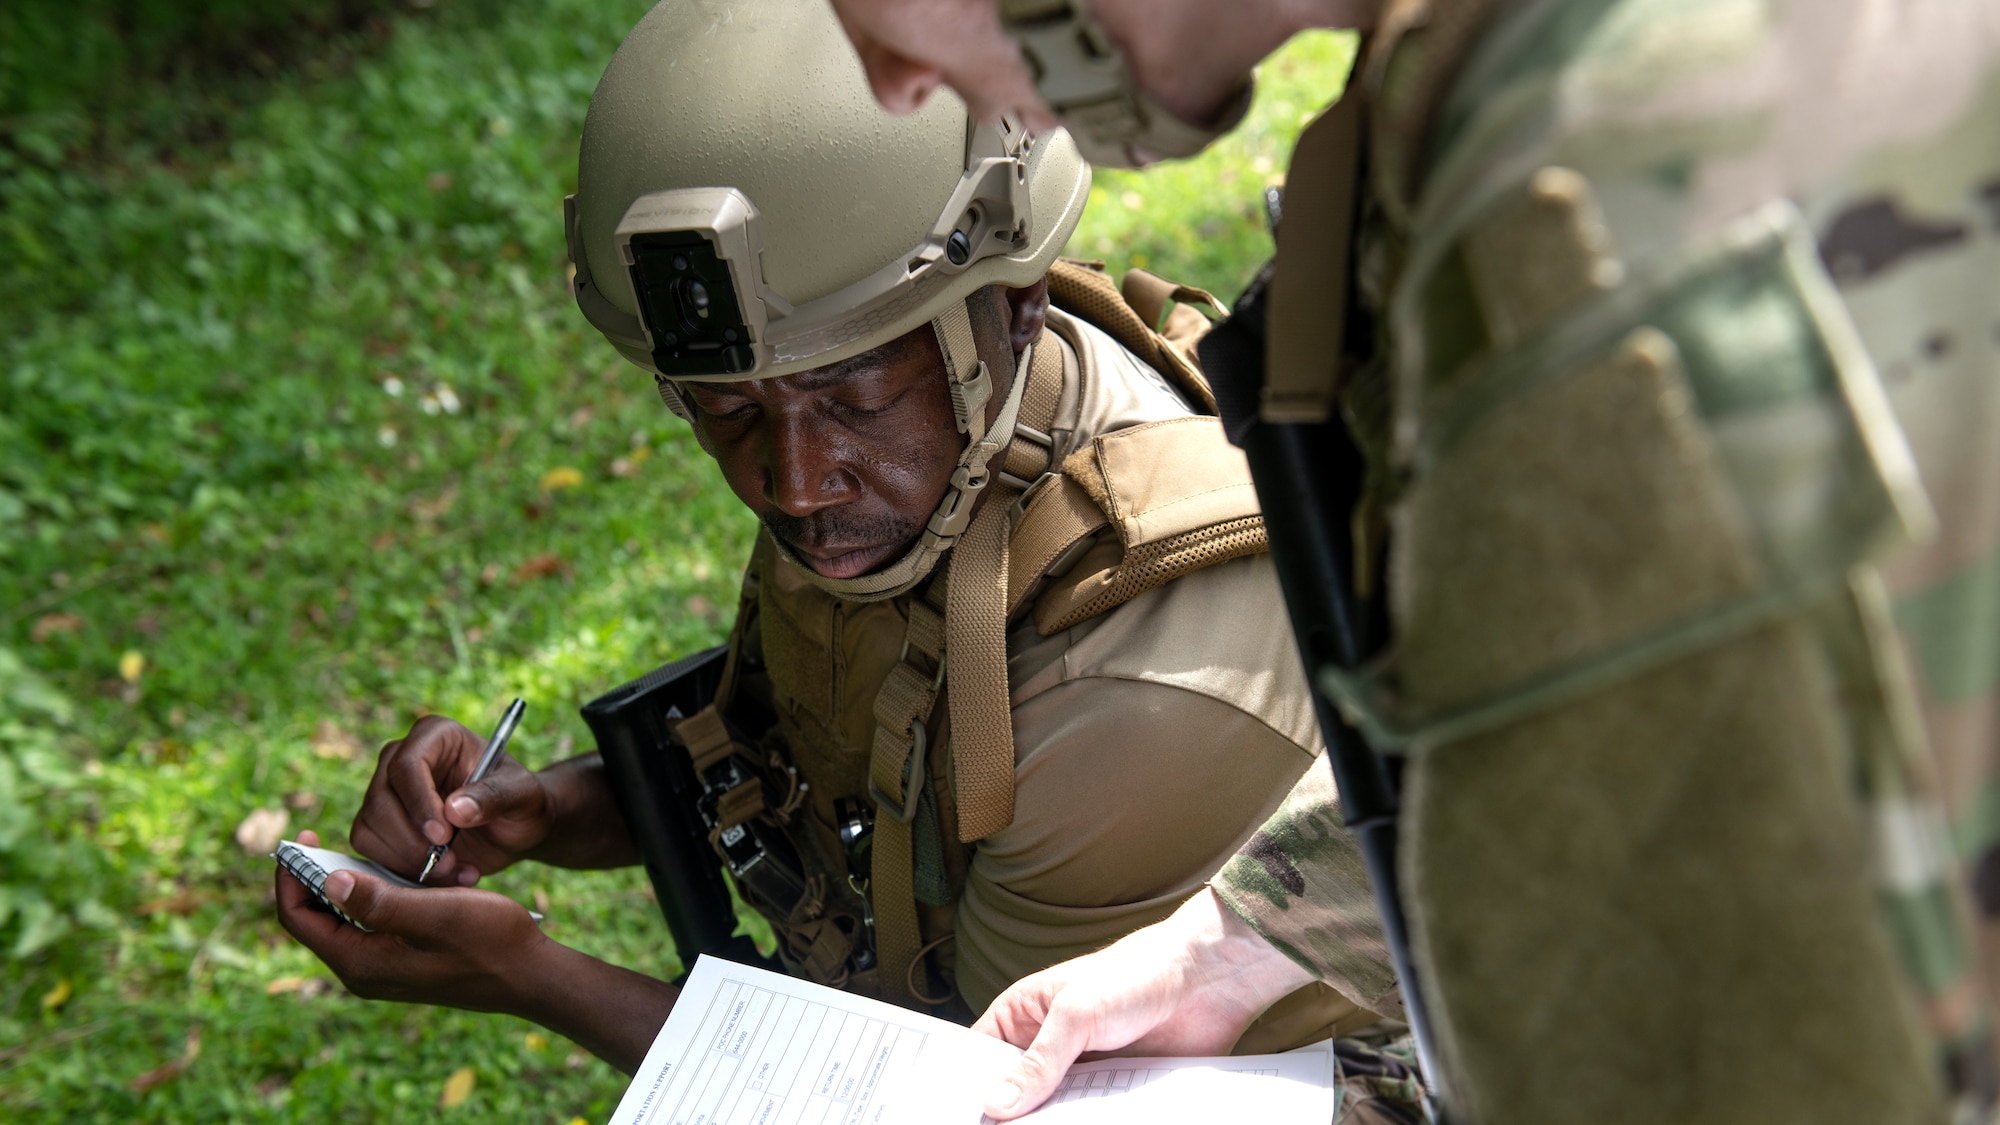 U.S. Air Force Airmen assigned to the 18th Security Forces Squadron discuss reconnaissance information during a field training exercise at Kadena Air Base, Japan, April 27, 2022. The Airmen were required to use land navigation techniques to reach their objective. (U.S. Air Force photo by Senior Airman Jessi Monte)